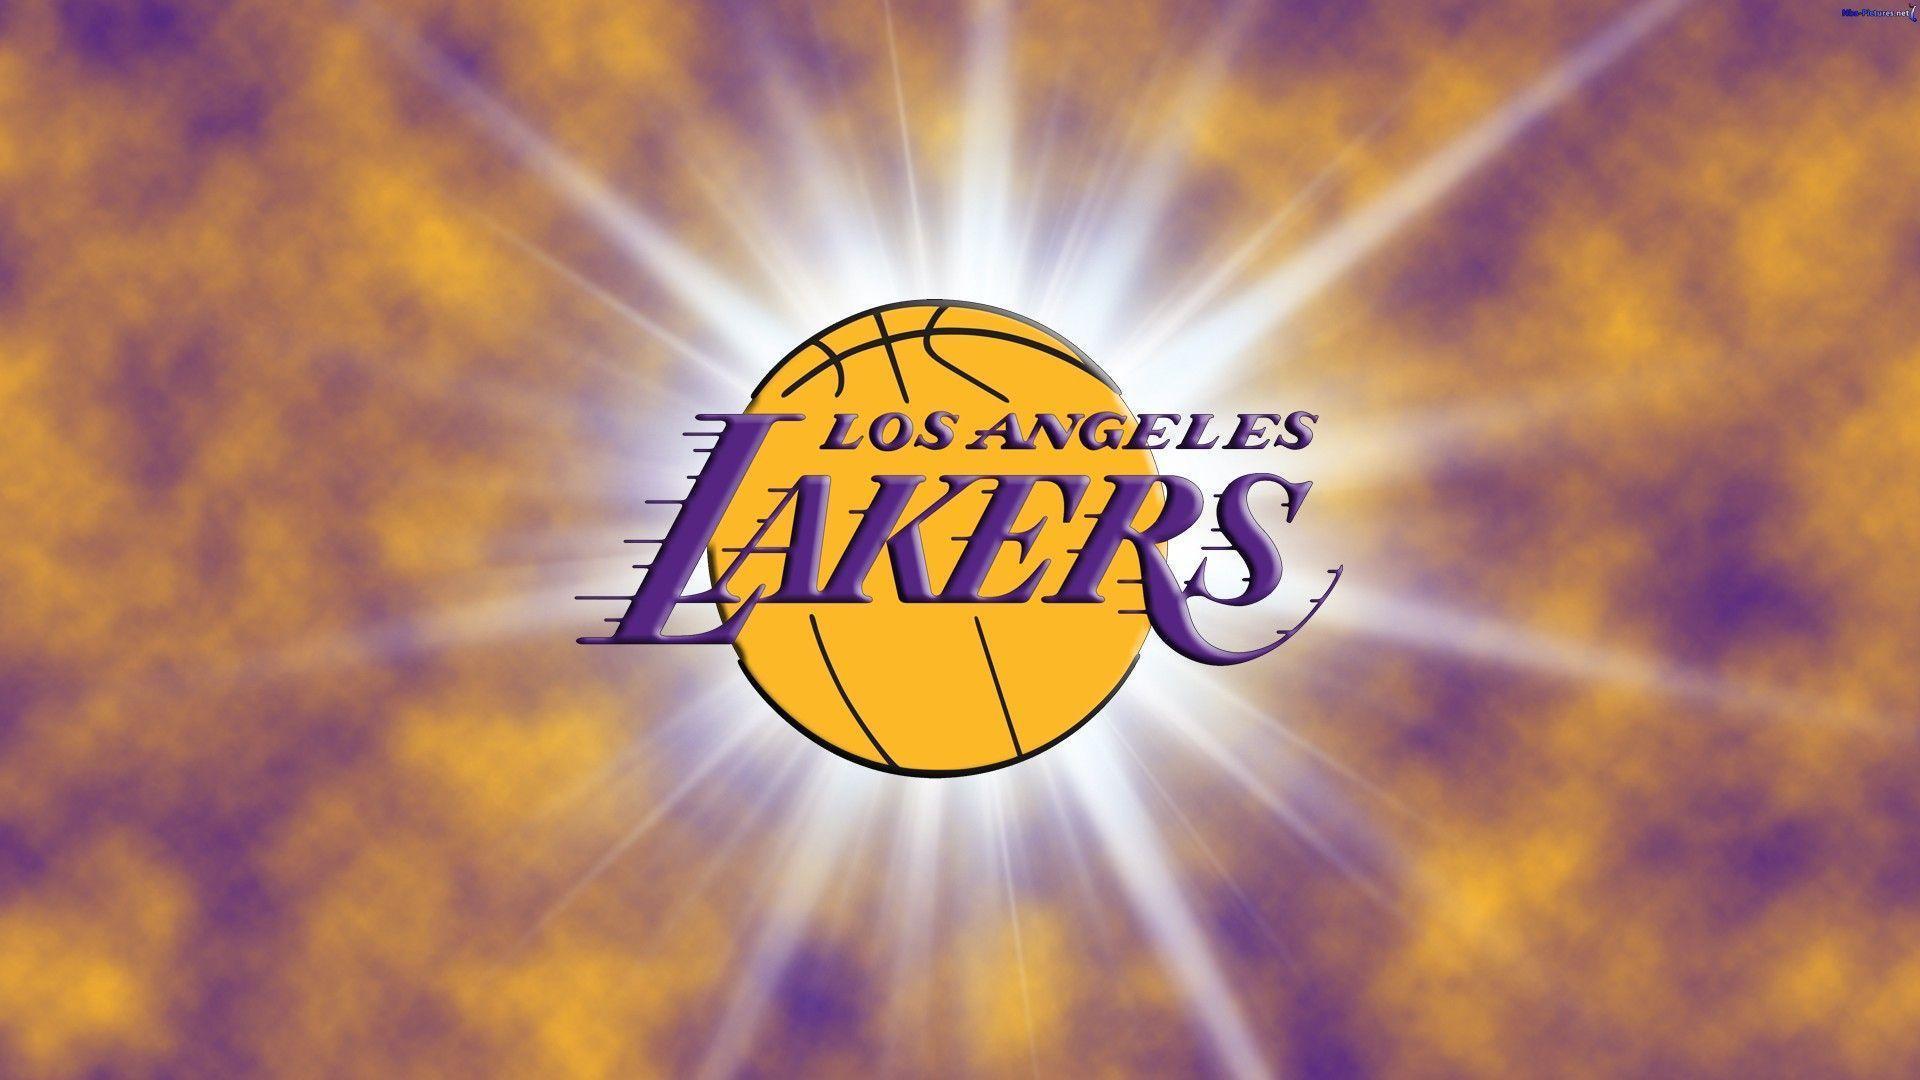 Los Angeles Lakers Logo Image. HD Wallpaper and Download Free